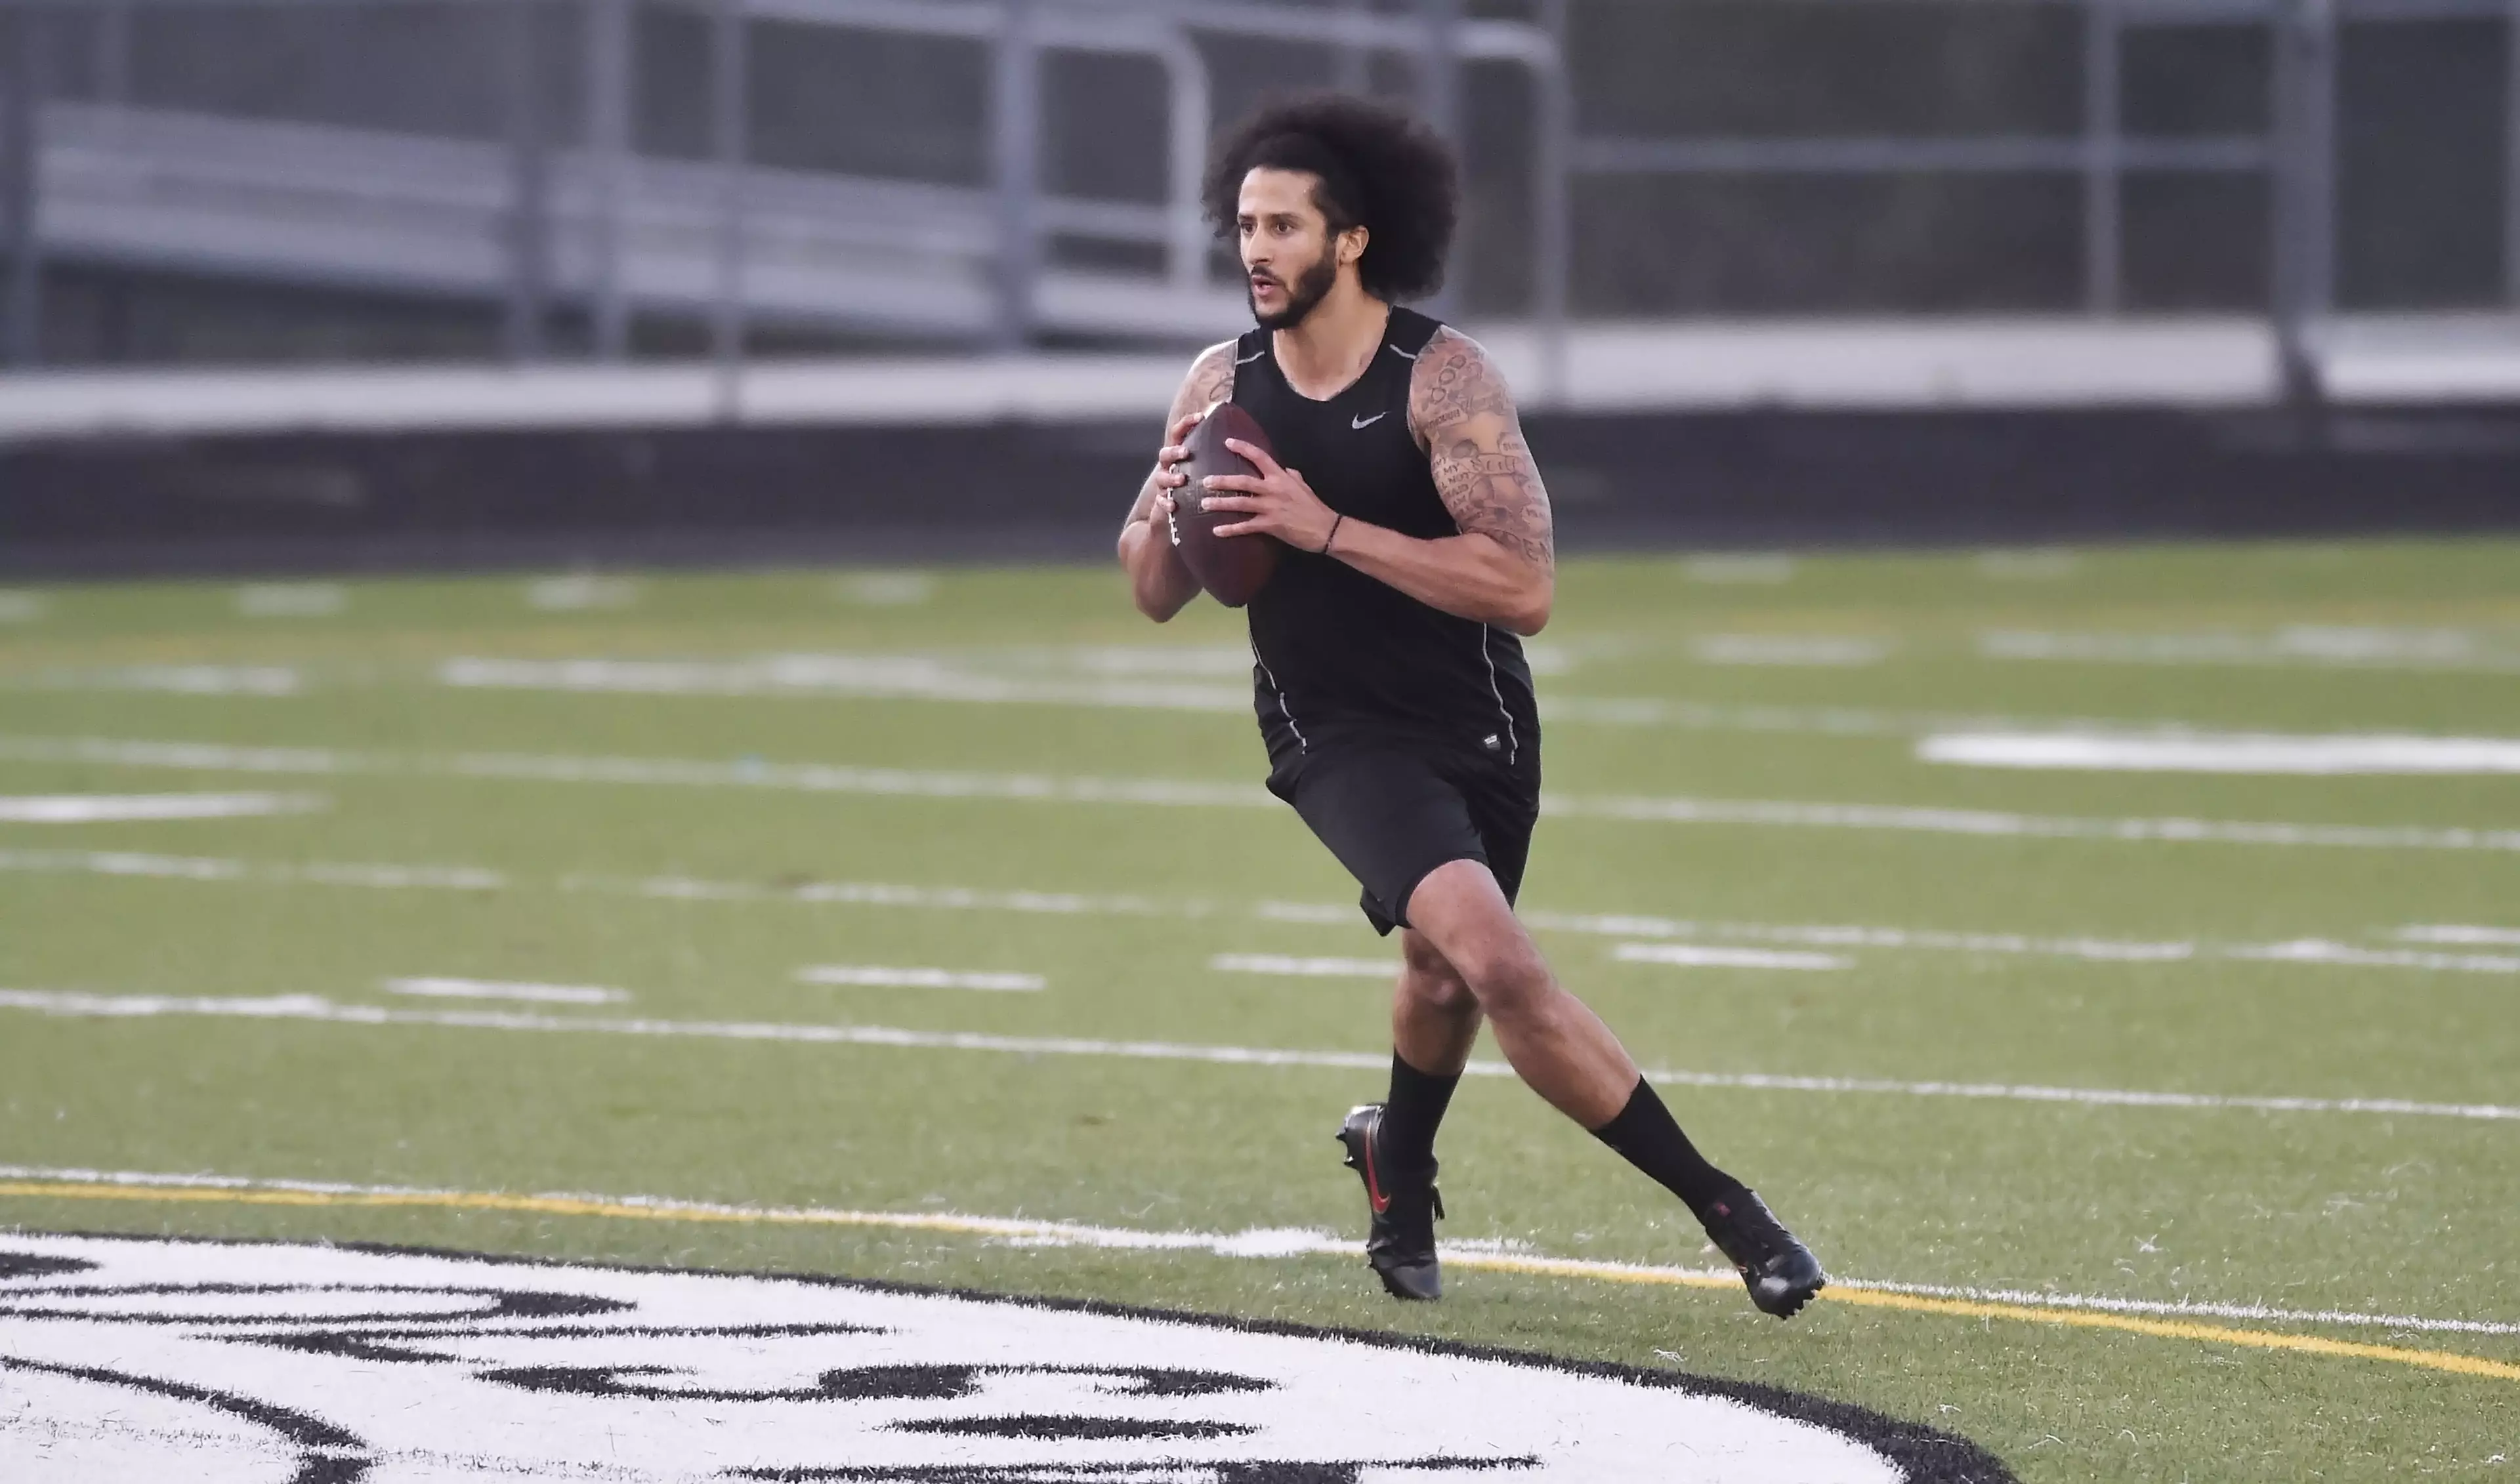 Colin Kaepernick worked out in at a high school instead of at the Atlanta Falcons' facility as previously arranged